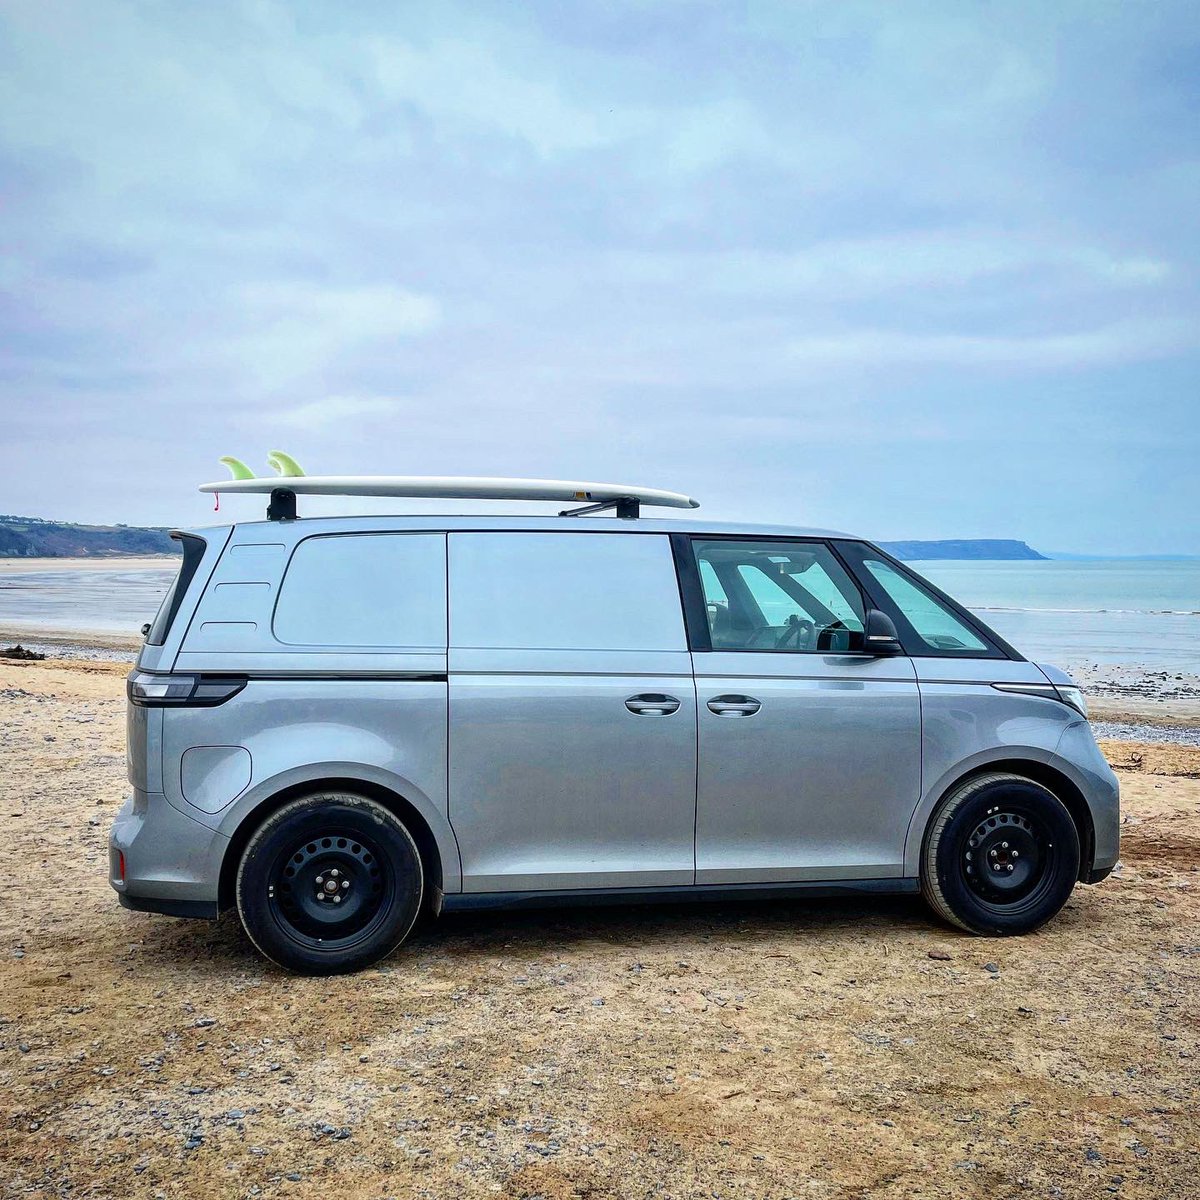 Sun, sea and modular campers 🤙🏼

@outlandishcamp for vans that work and play 

#VansThatWorkAndPlay #outlandish #camper #campervan #vanlife #modularcamper #electriccamper #vwidbuzz #vwidbuzzcamper #idbuzz #idbuzzcamper #outlandishcampers